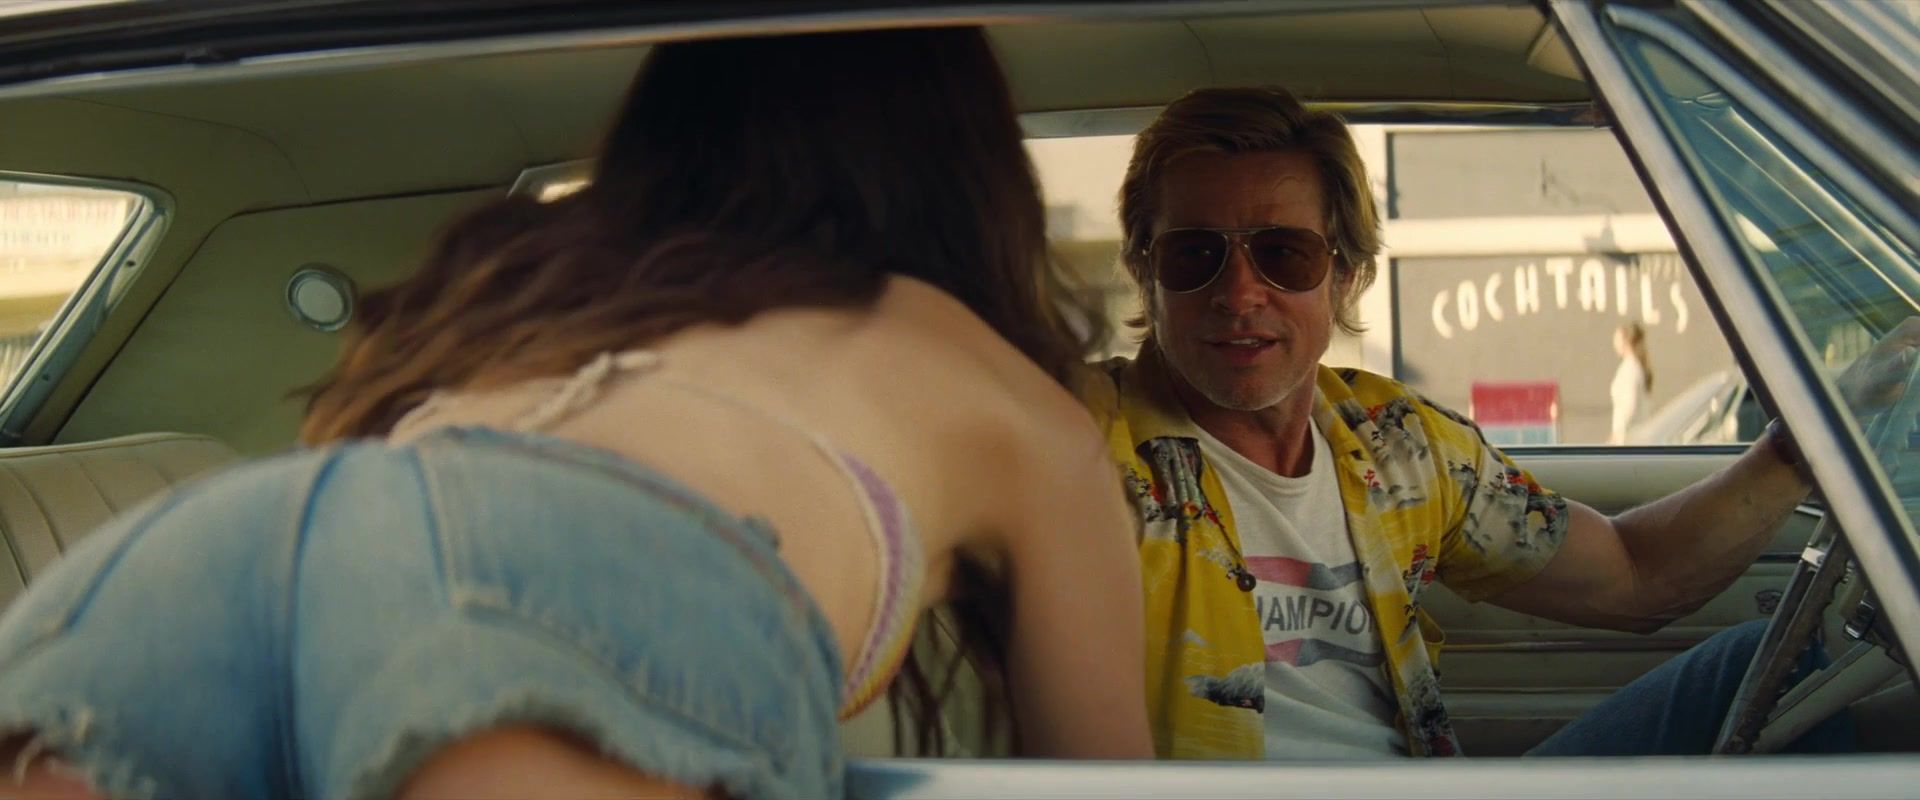 Gay Twinks Sexy Dakota Fanning, Margaret Qualley naked- Once Upon A Time In Hollywood (2019) Pay